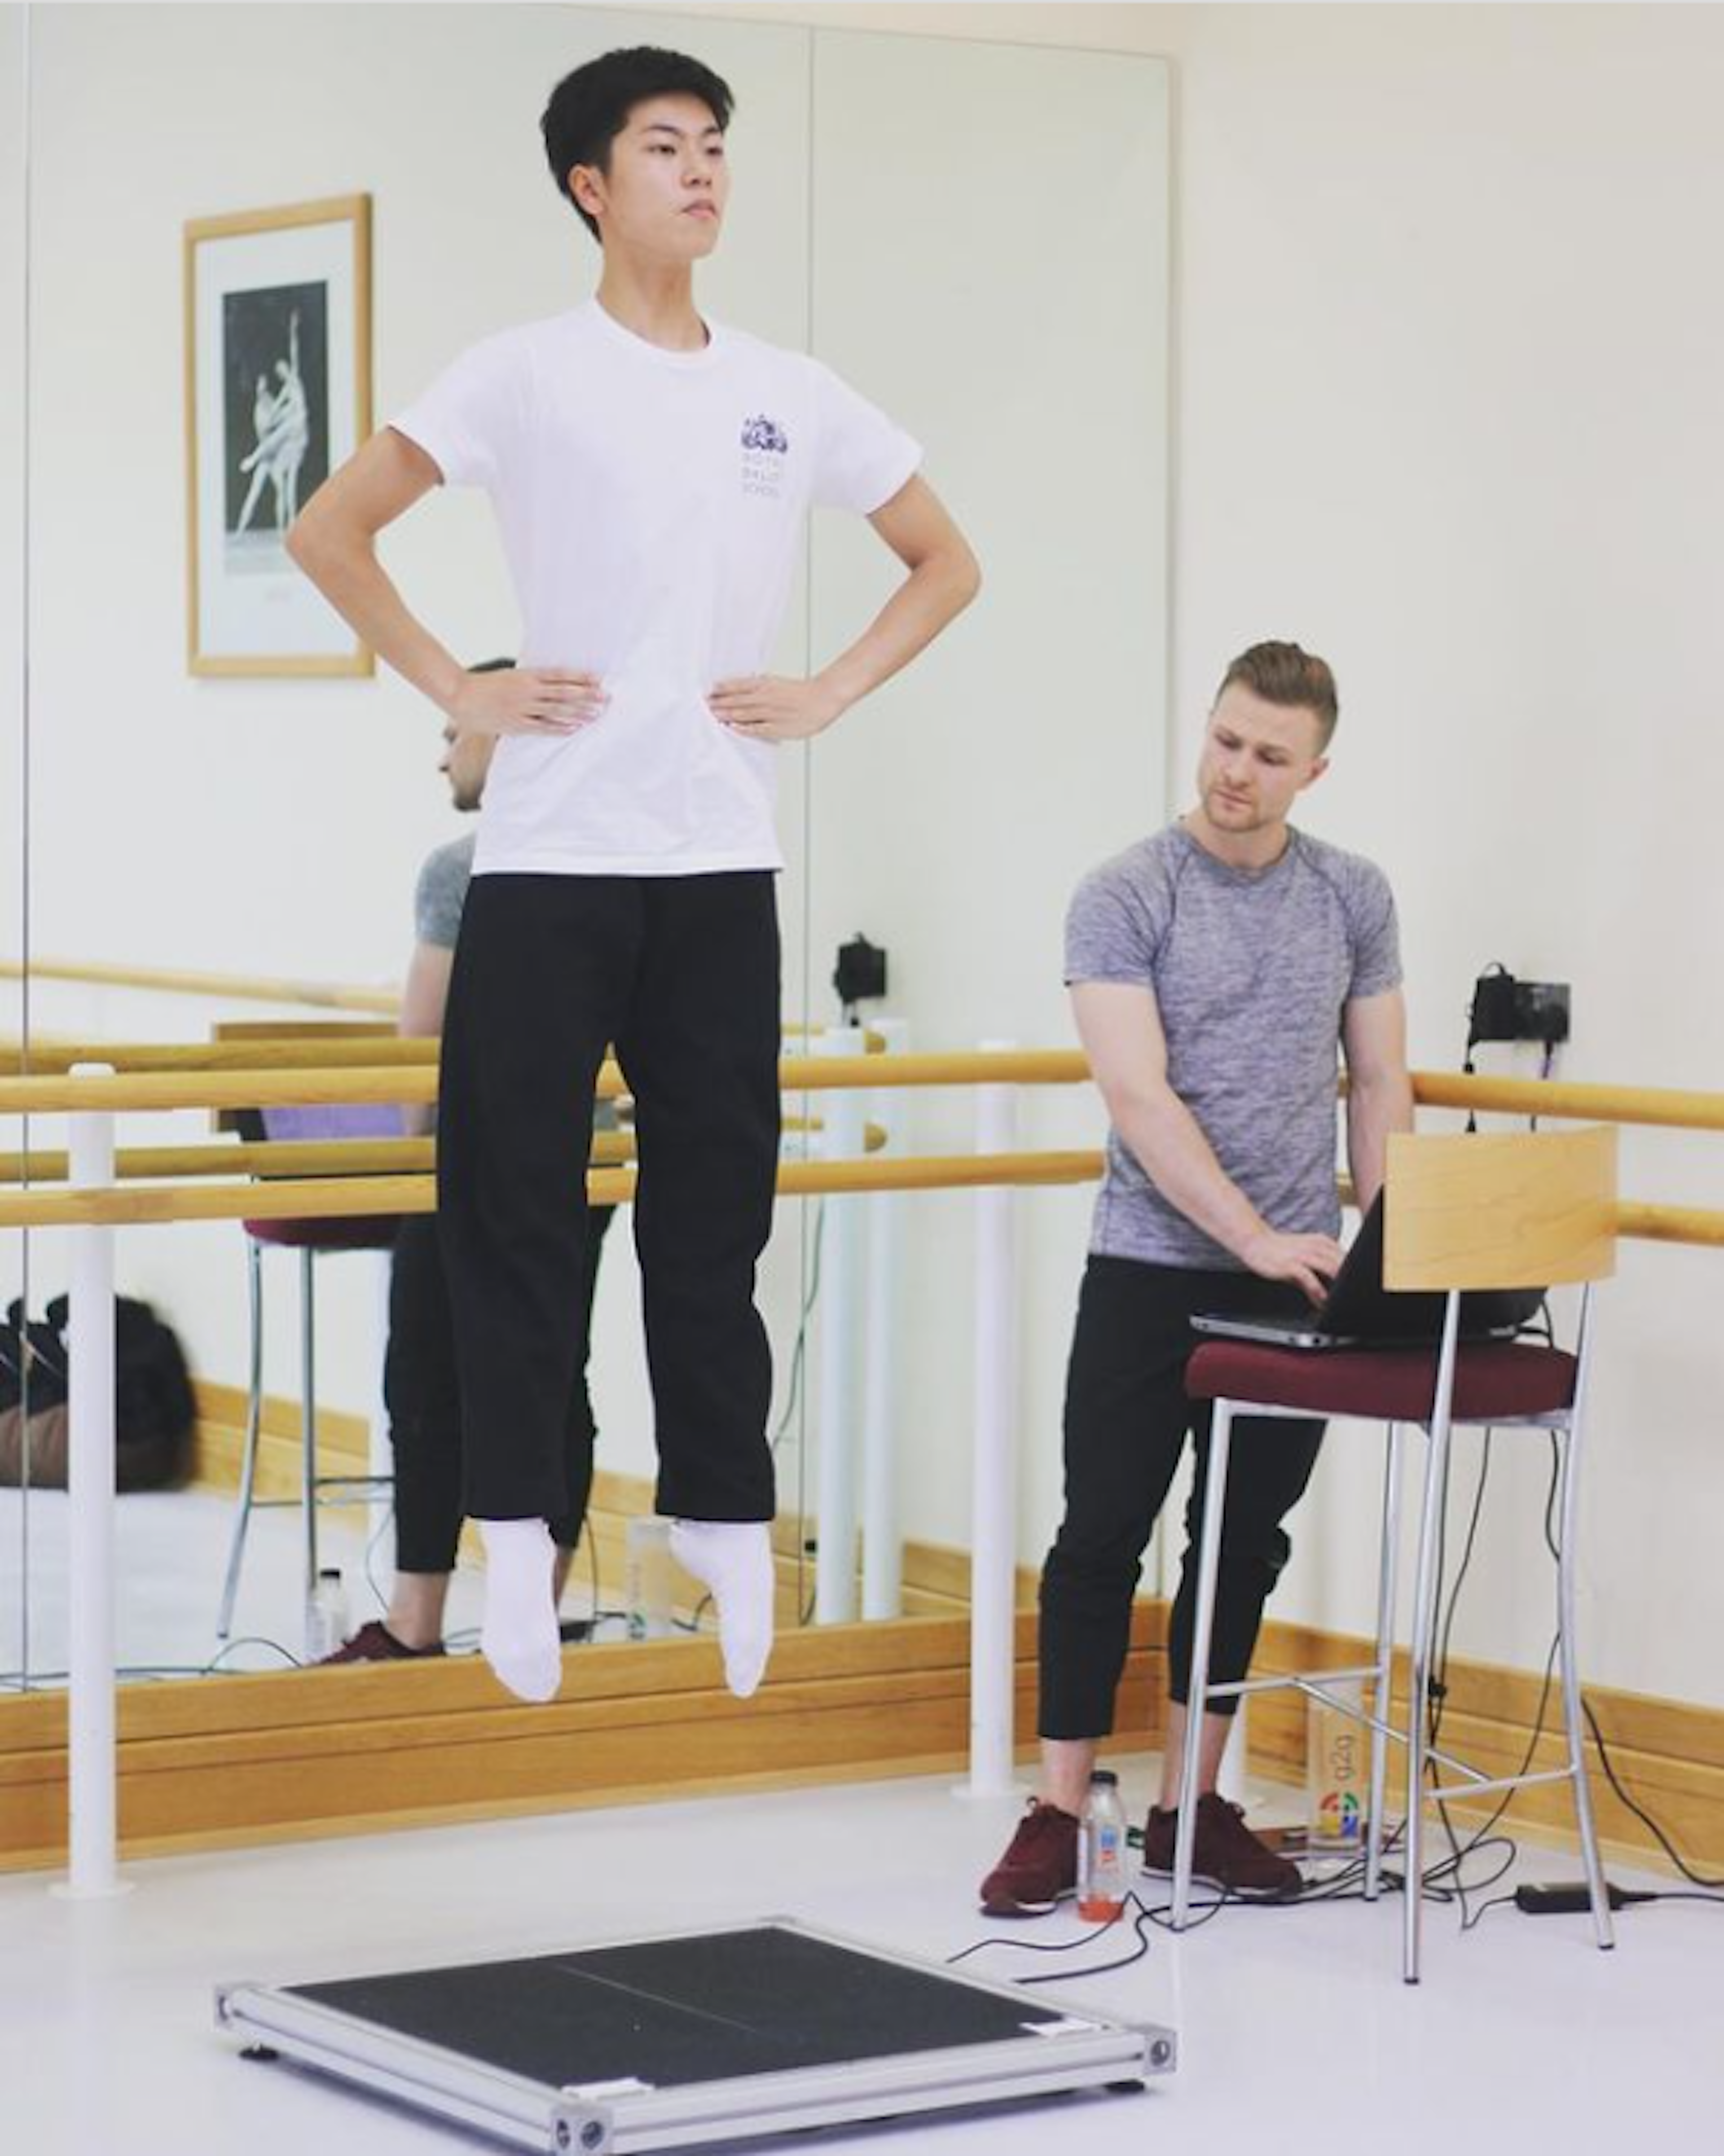 Royal Ballet School student performing a jump test on the ForceDecks